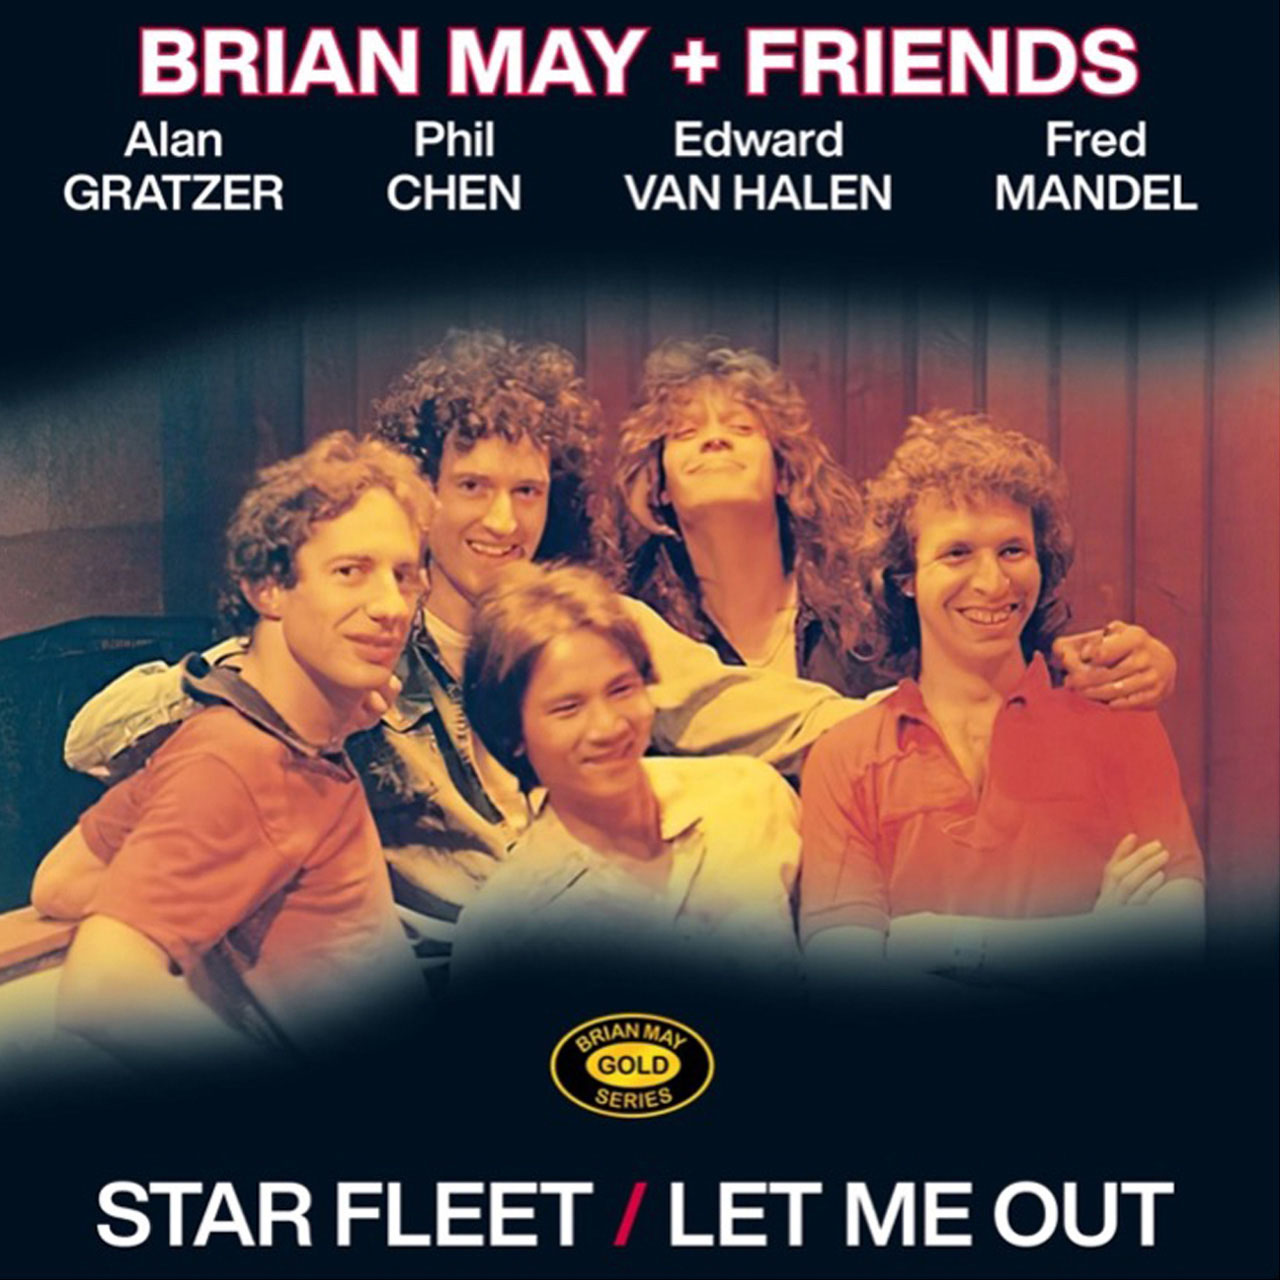 Brian May And Friends - 'Starship Fleet Project' cover art courtesy of Queen online/Universal Music Group